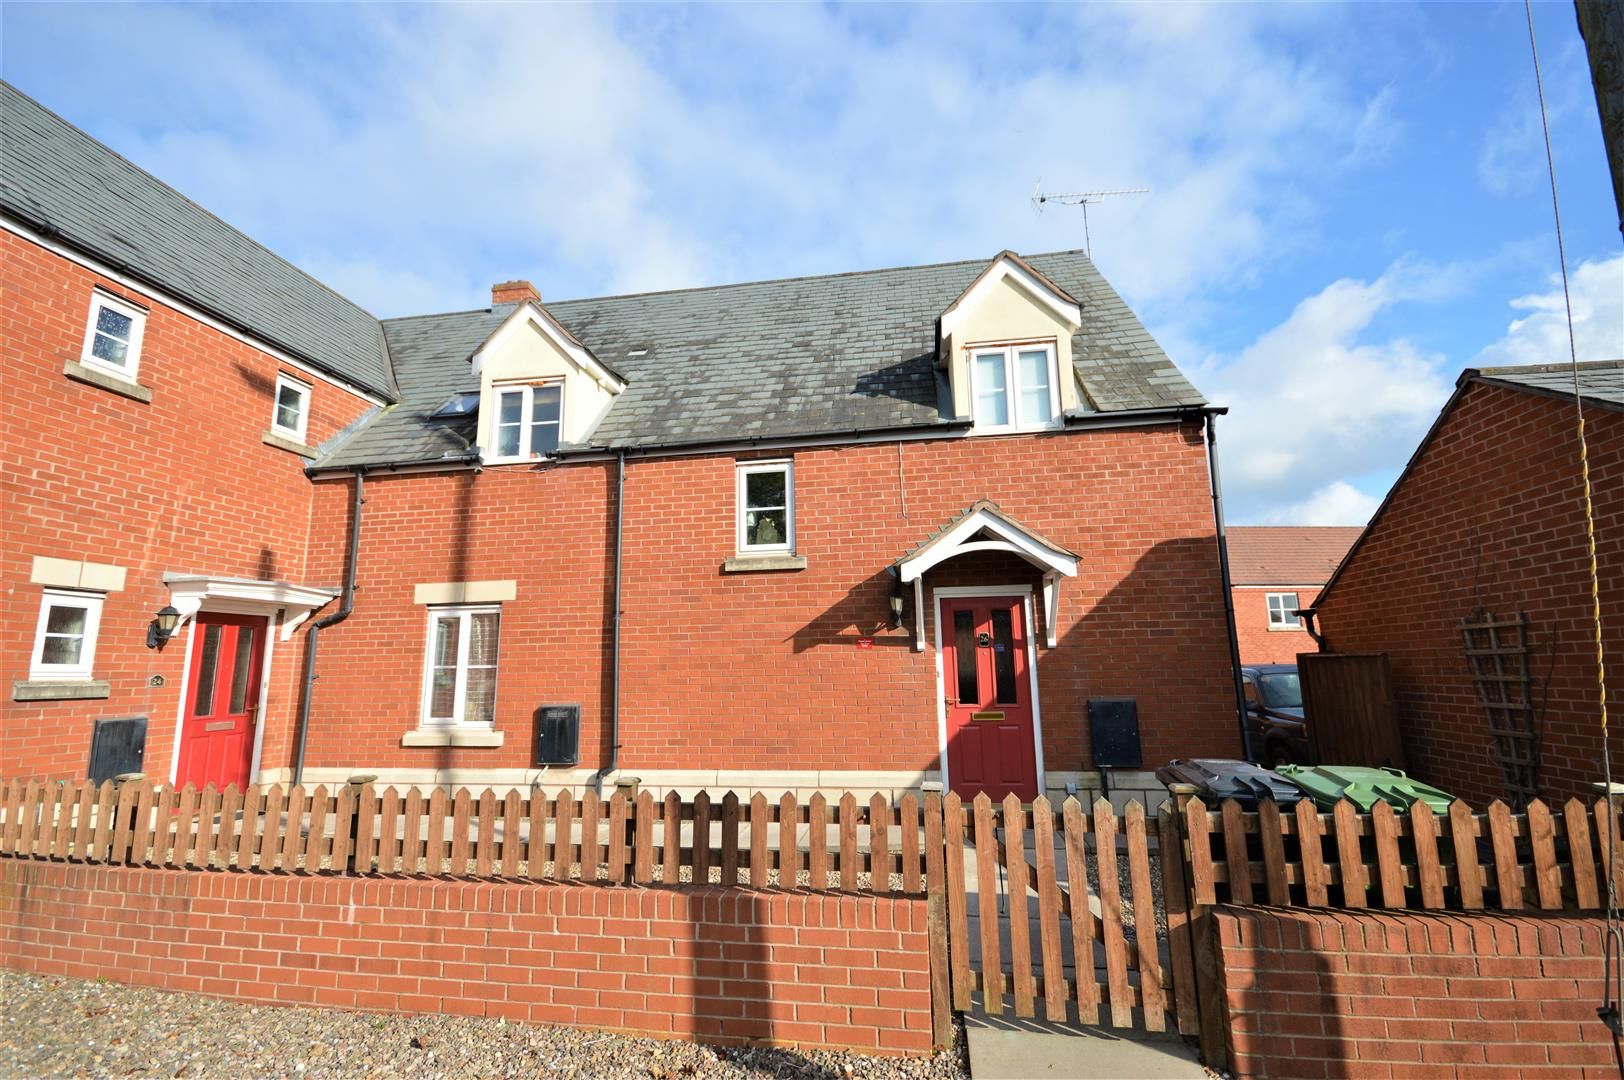 4 bed semi-detached for sale in Leominster - Property Image 1